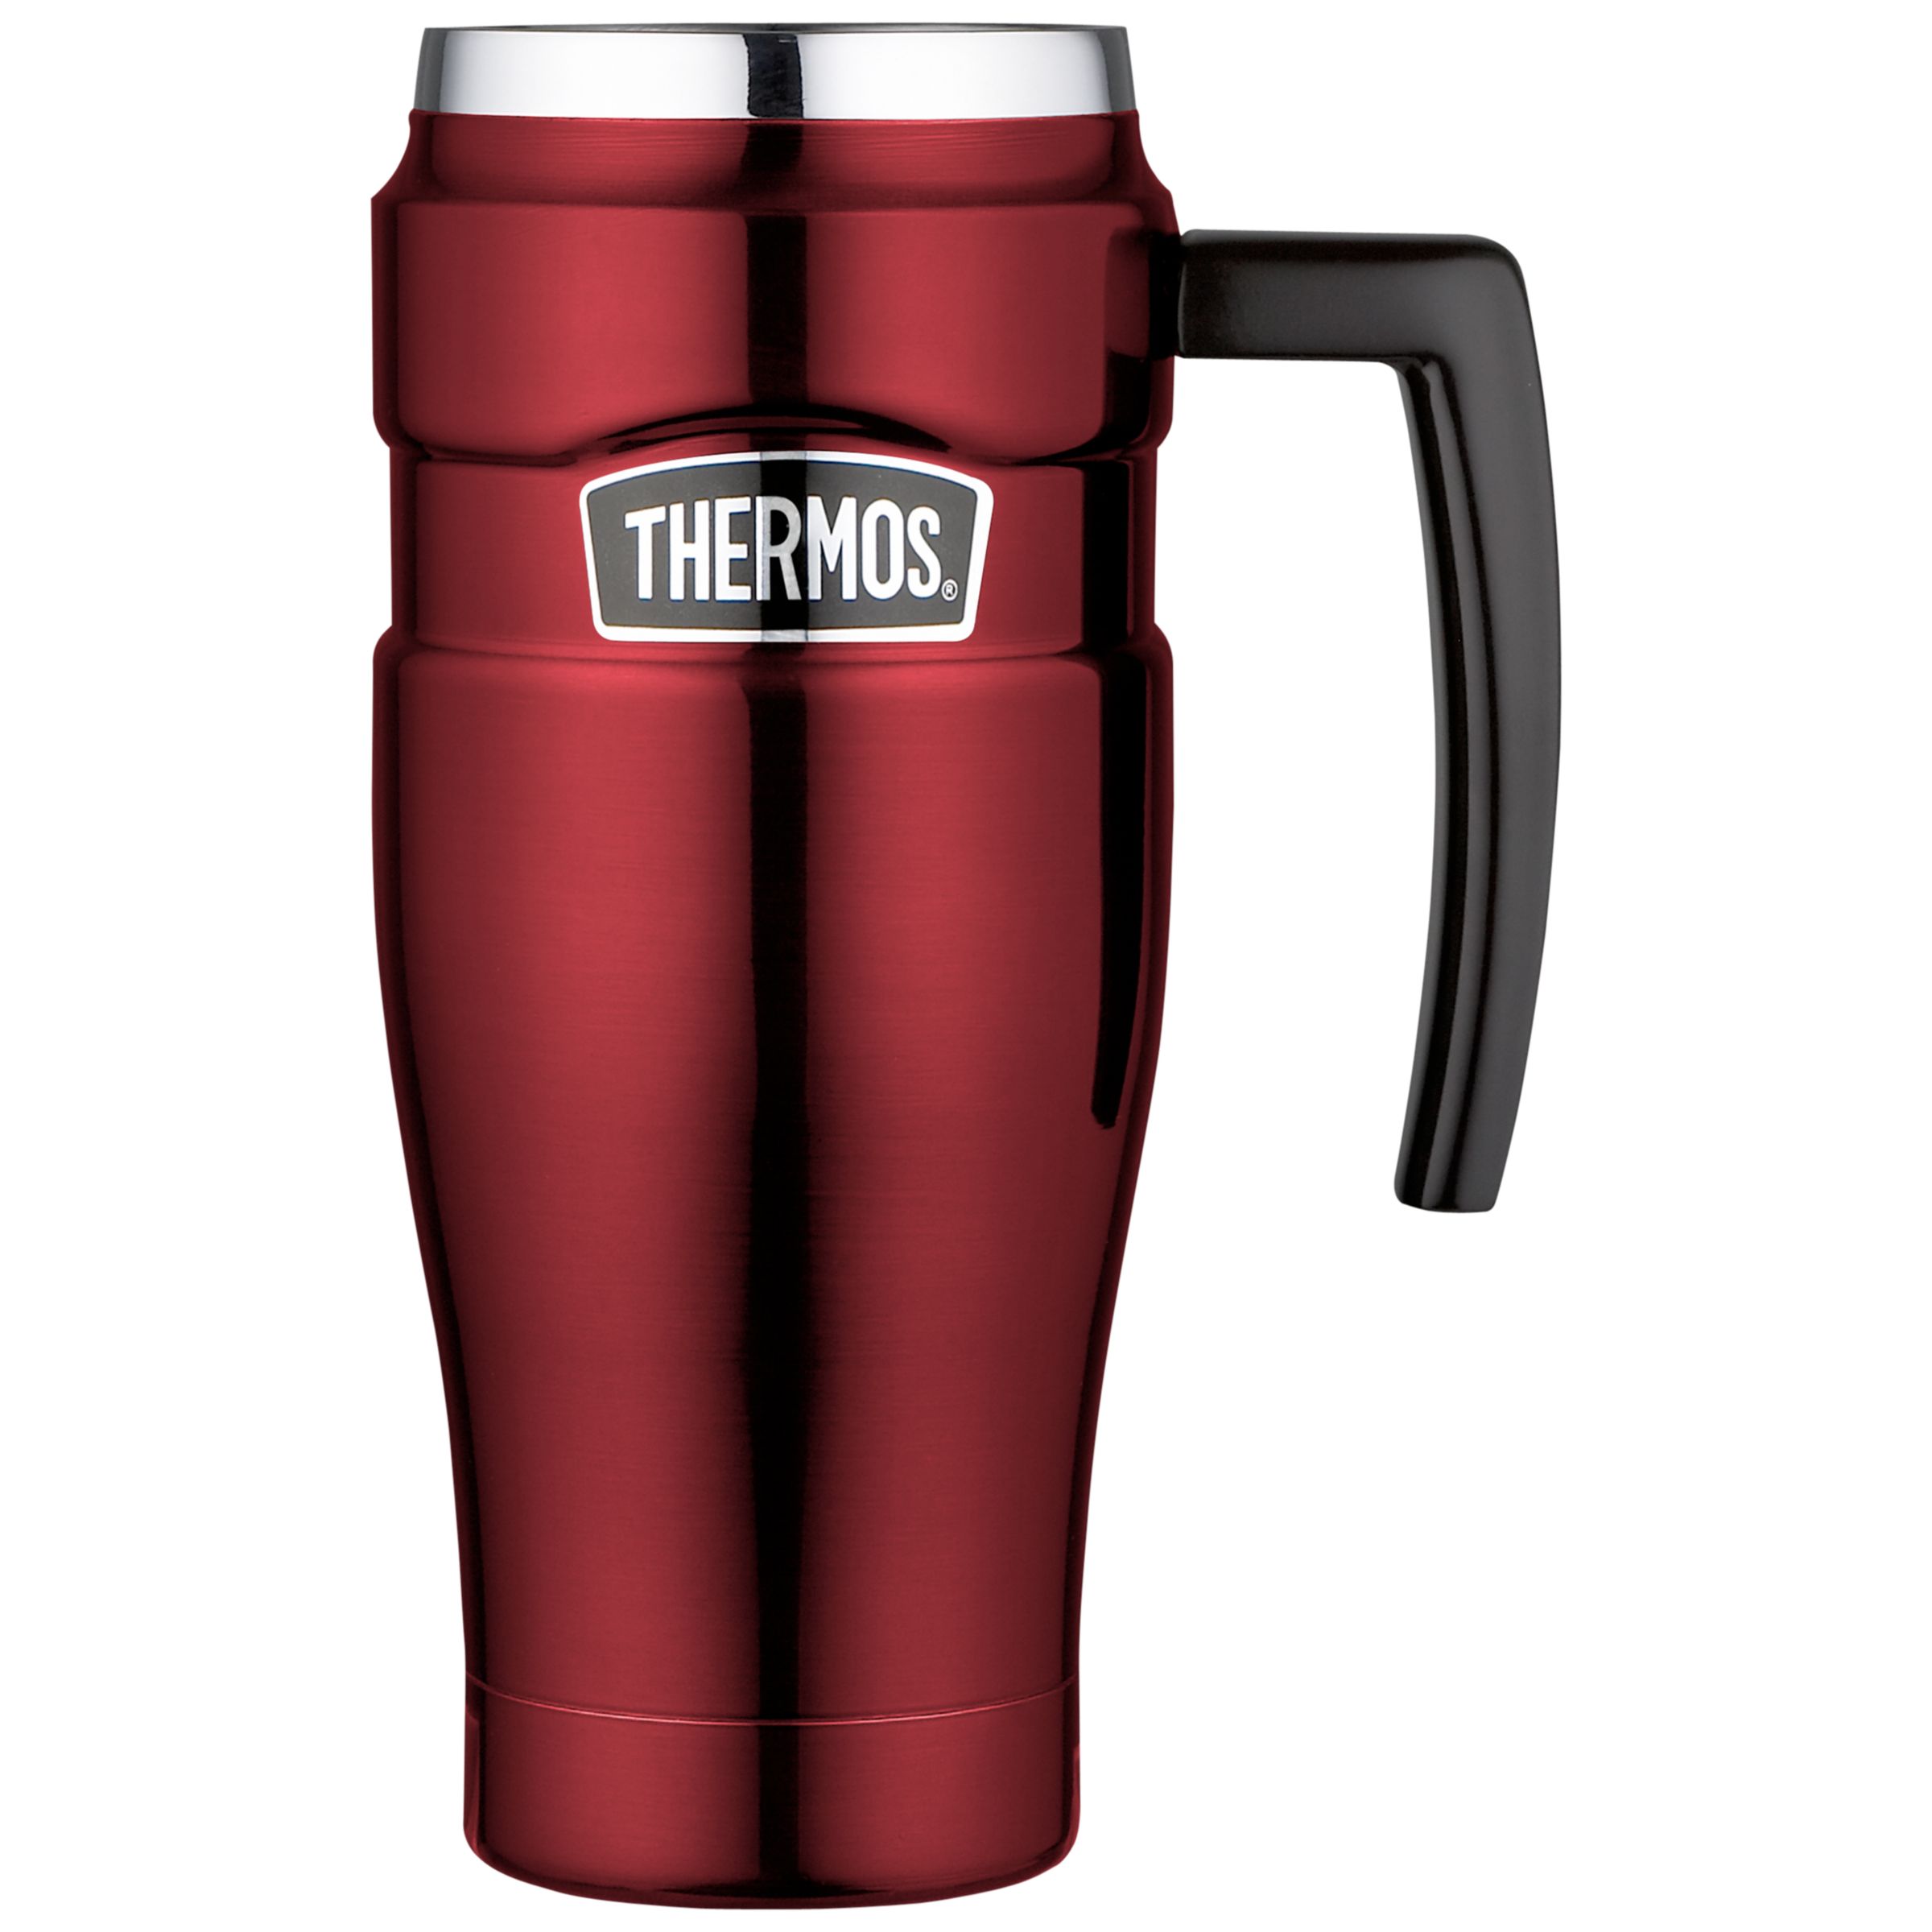 Thermos Leakproof Travel Flask, 0.47L